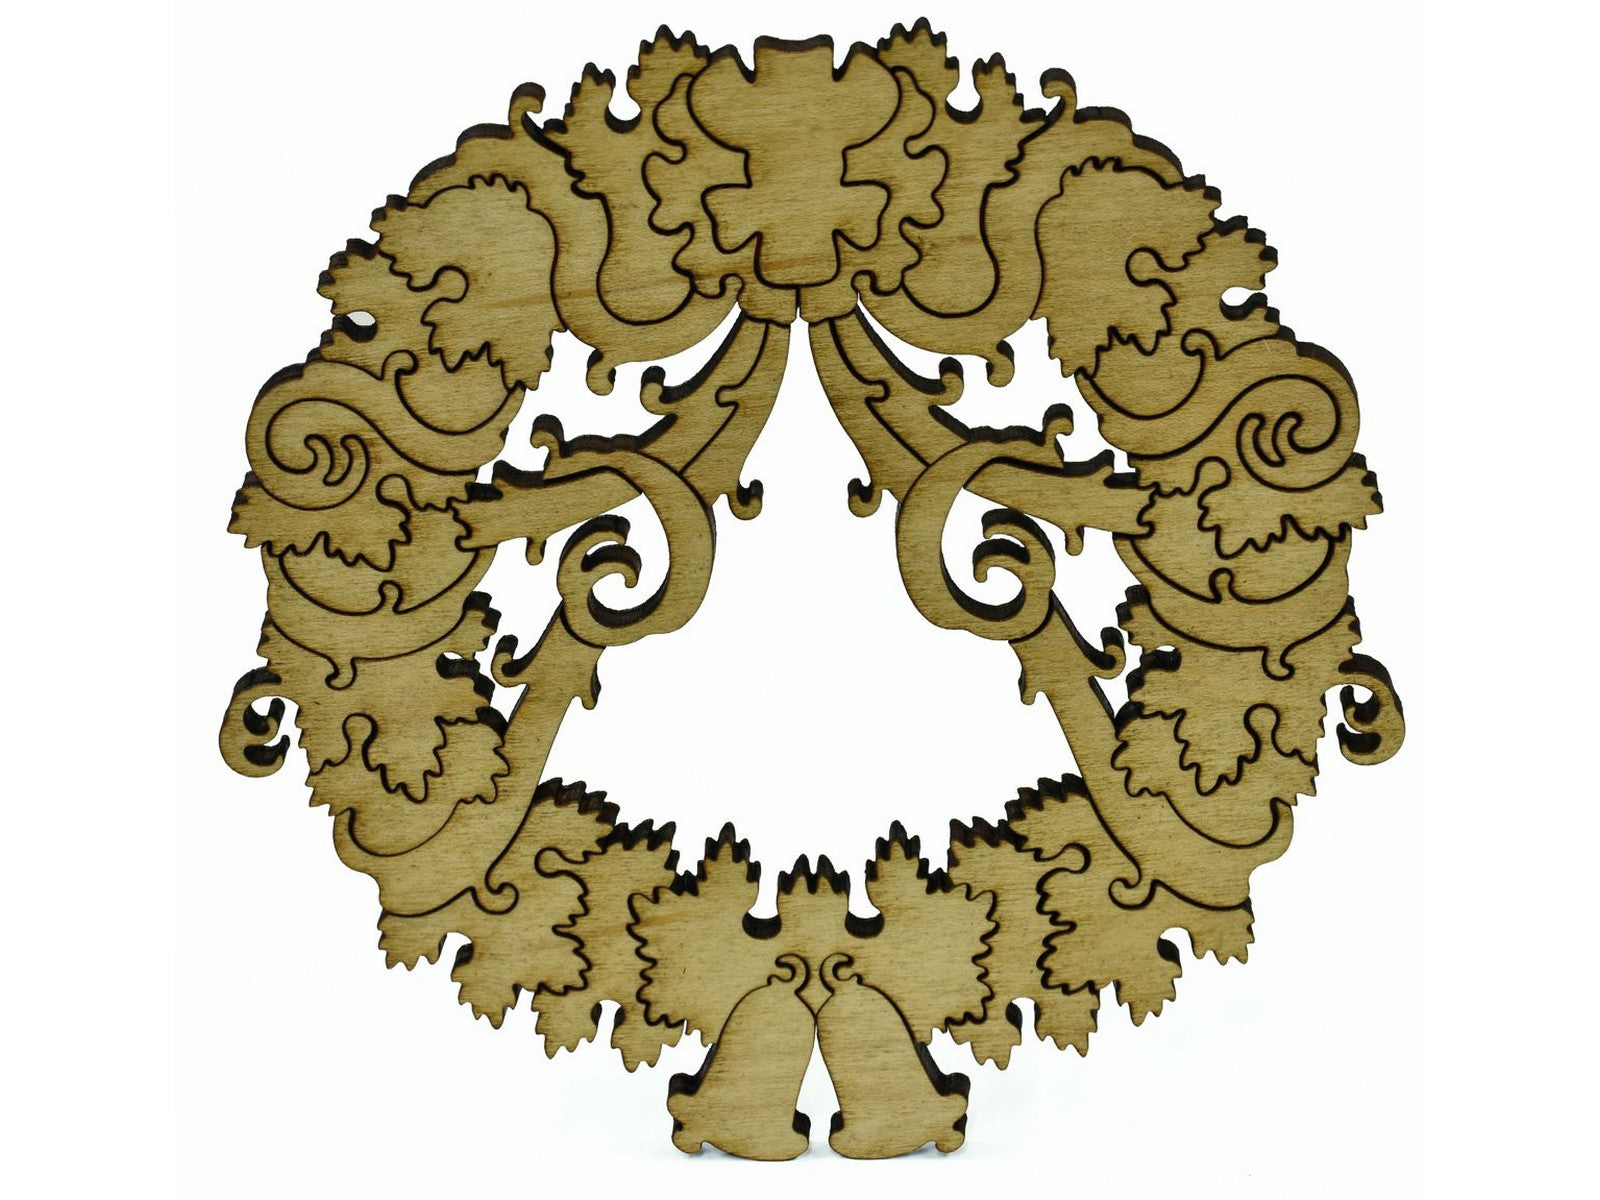 A closeup of pieces in the shape of a holiday wreath.